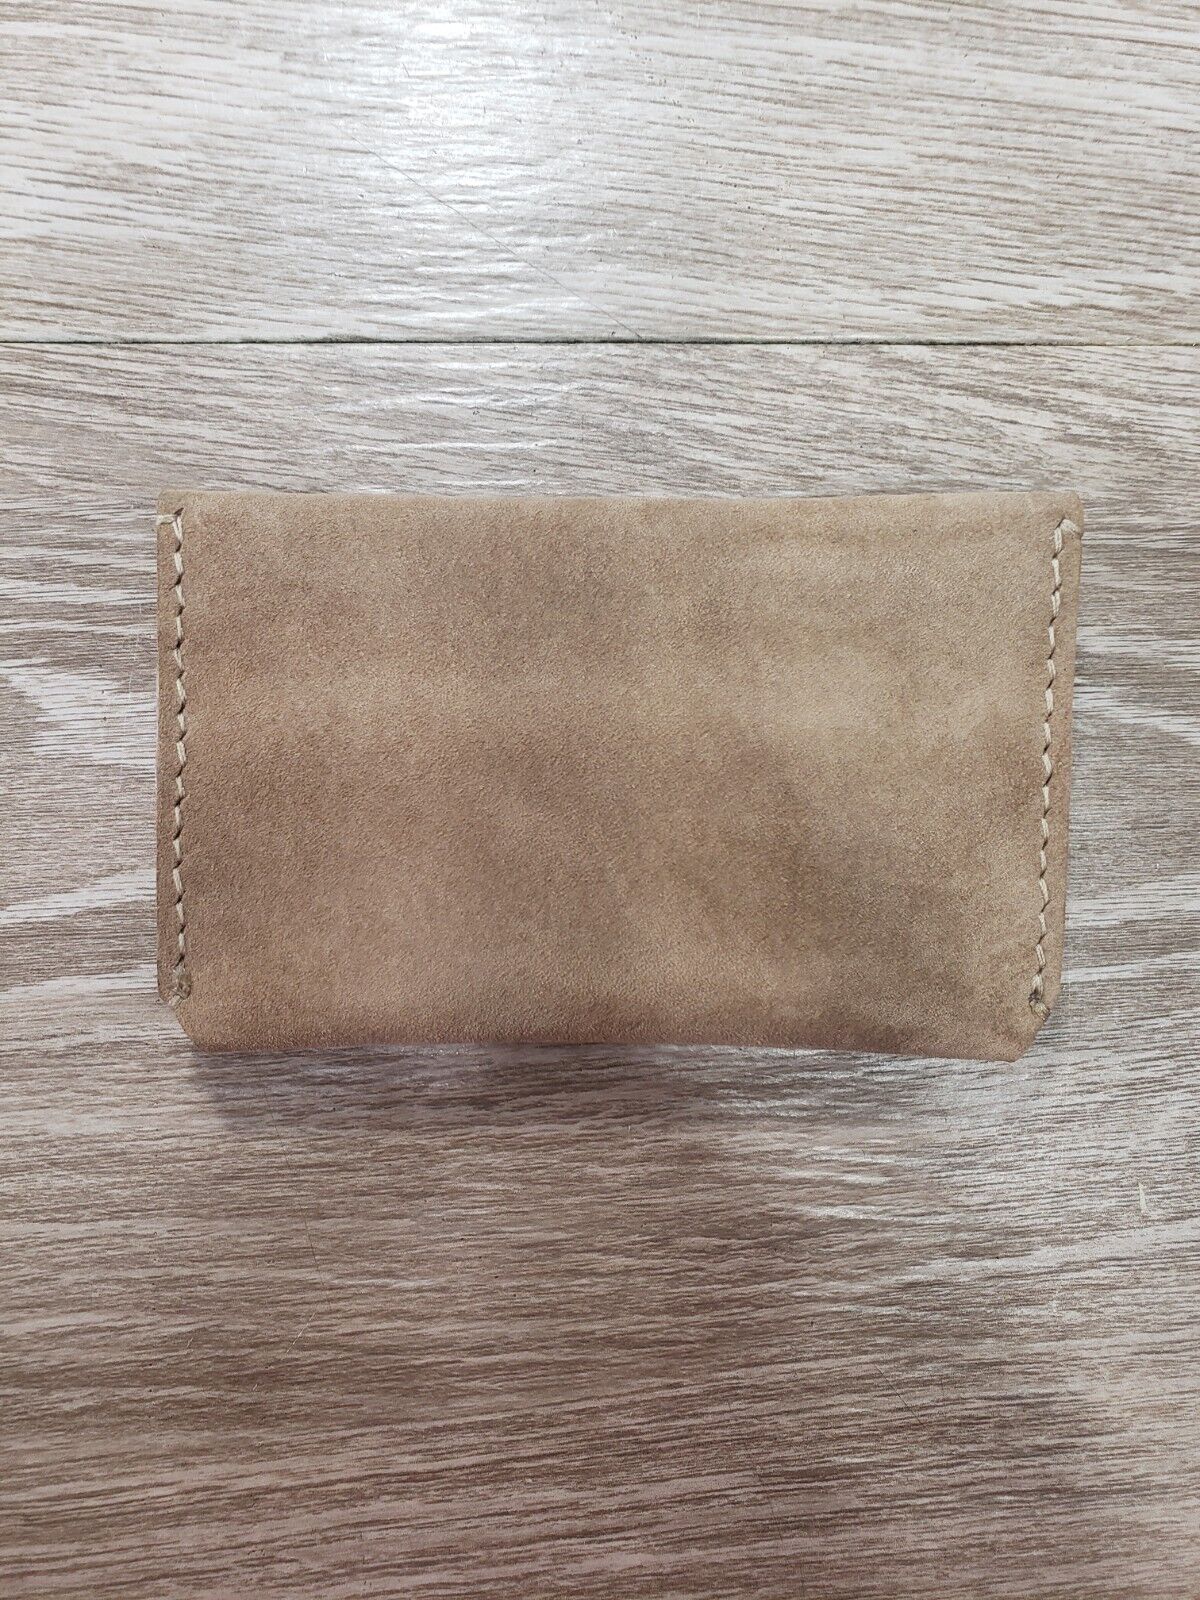 Handmade Reclaimed Suede Leather Wallet Pouch Bei… - image 2